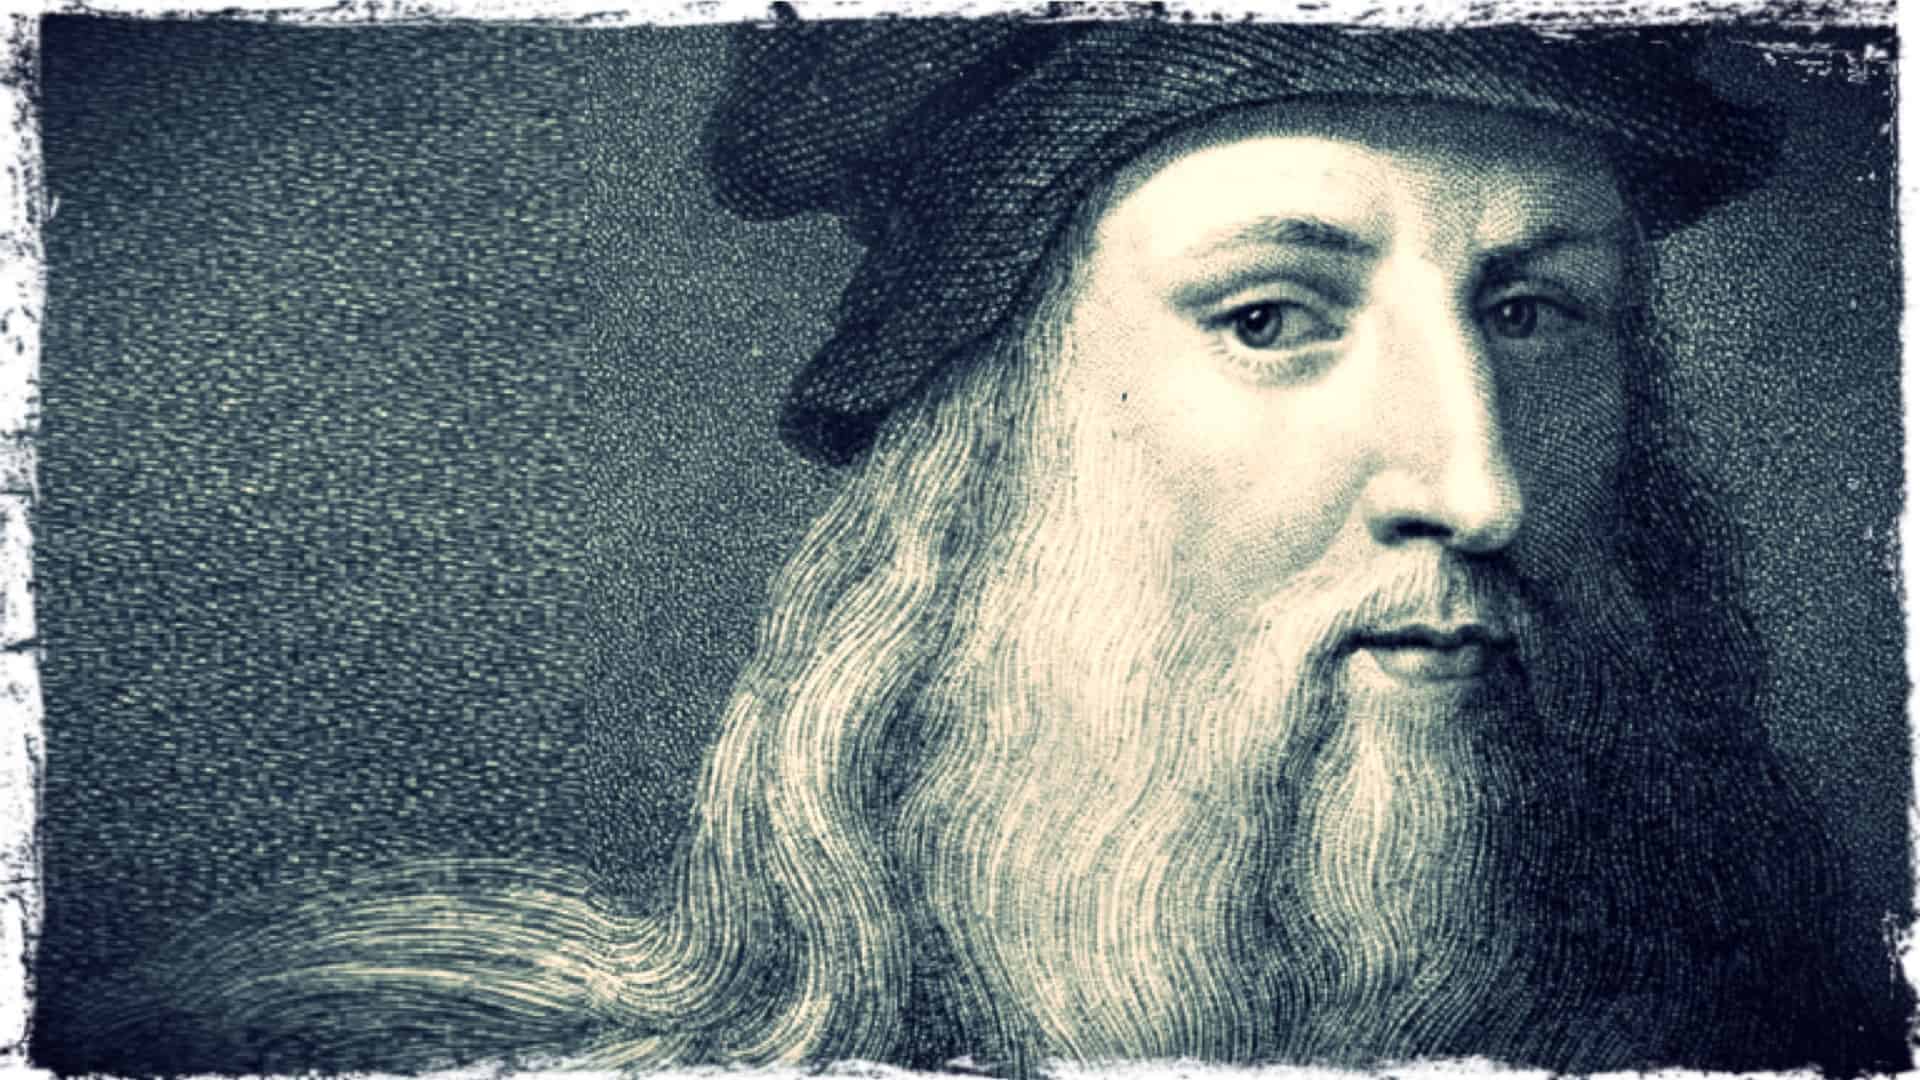 A close-up image of Leonardo da Vinci is shown. The image is monochromatic and appears to be rendered in graphite.